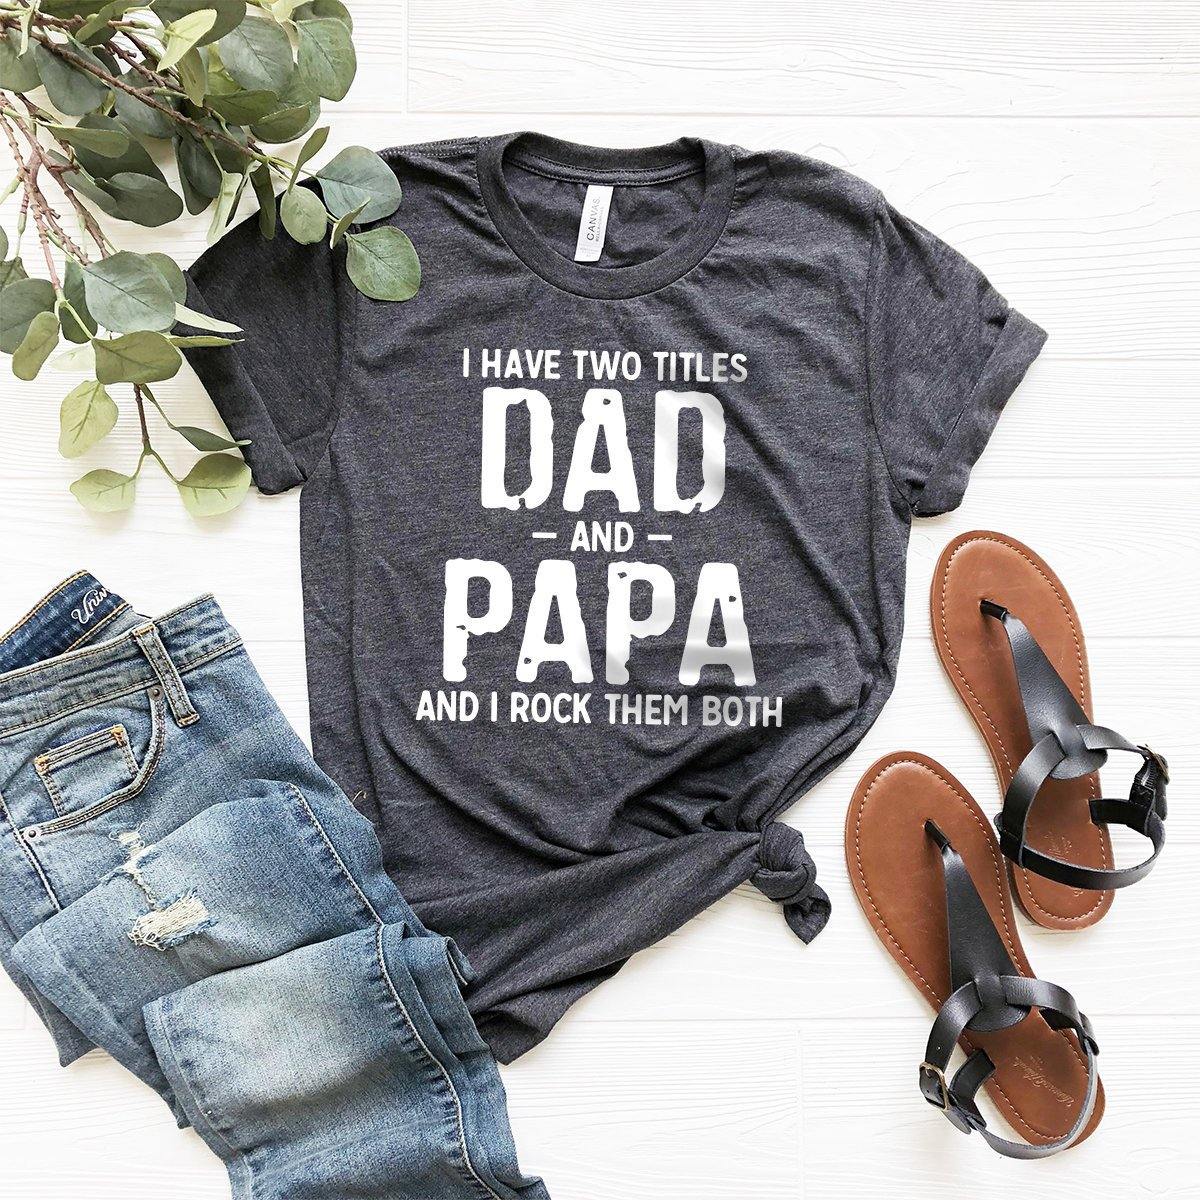 Dad And Papa Shirt, Dad Shirt, Father's Day Gift, Fathers Day Shirt, Funny Dad Shirt, I Have Two Titles Dad And Papa Shirt, Dad T-Shirt - Fastdeliverytees.com